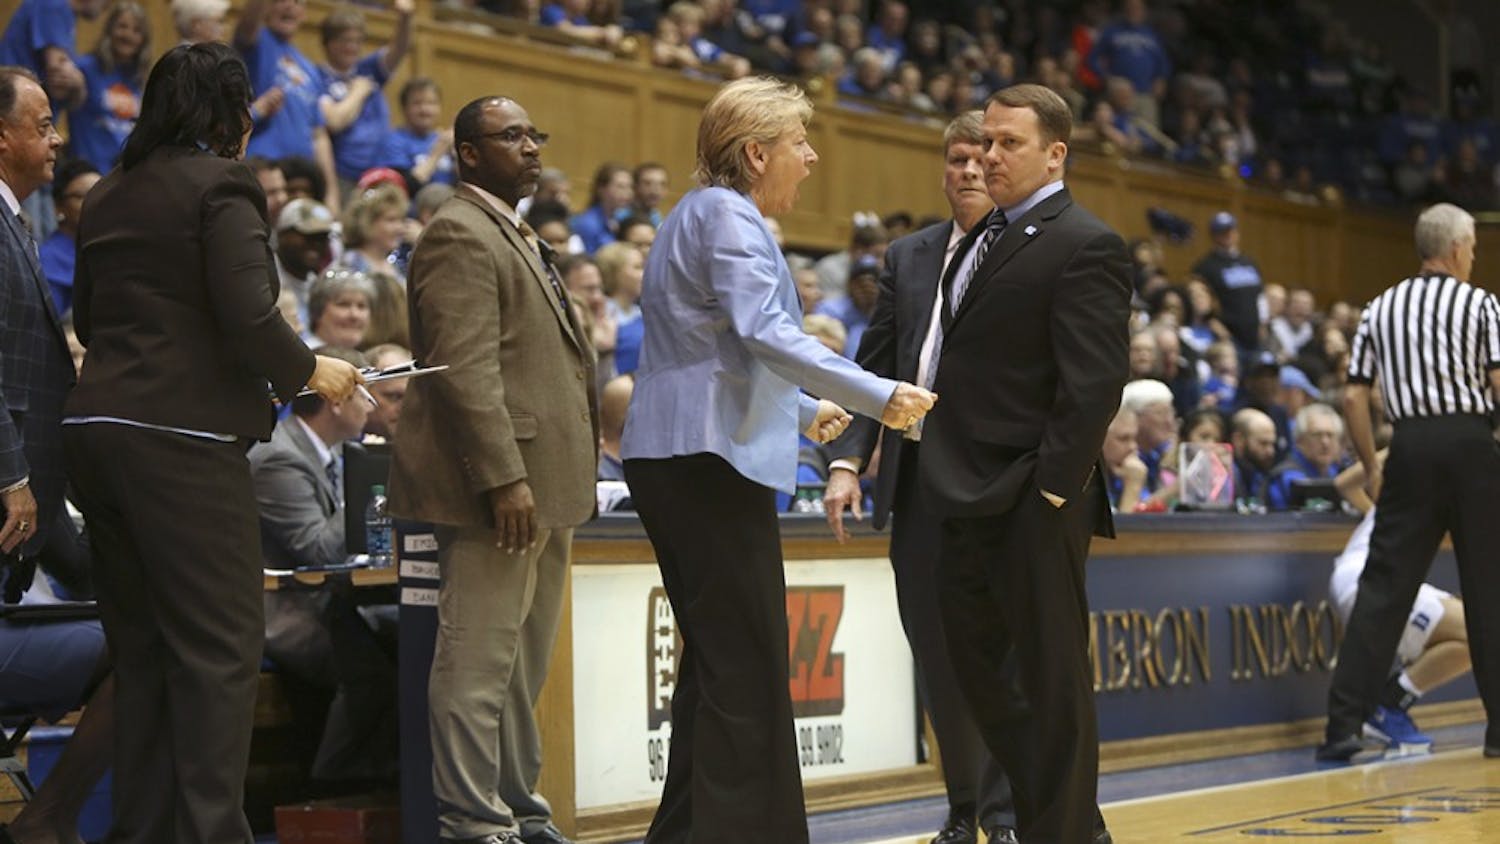 The UNC women's basketball team loss to Duke Sunday afternoon 55 to 71 at Cameron Indoor Stadium.